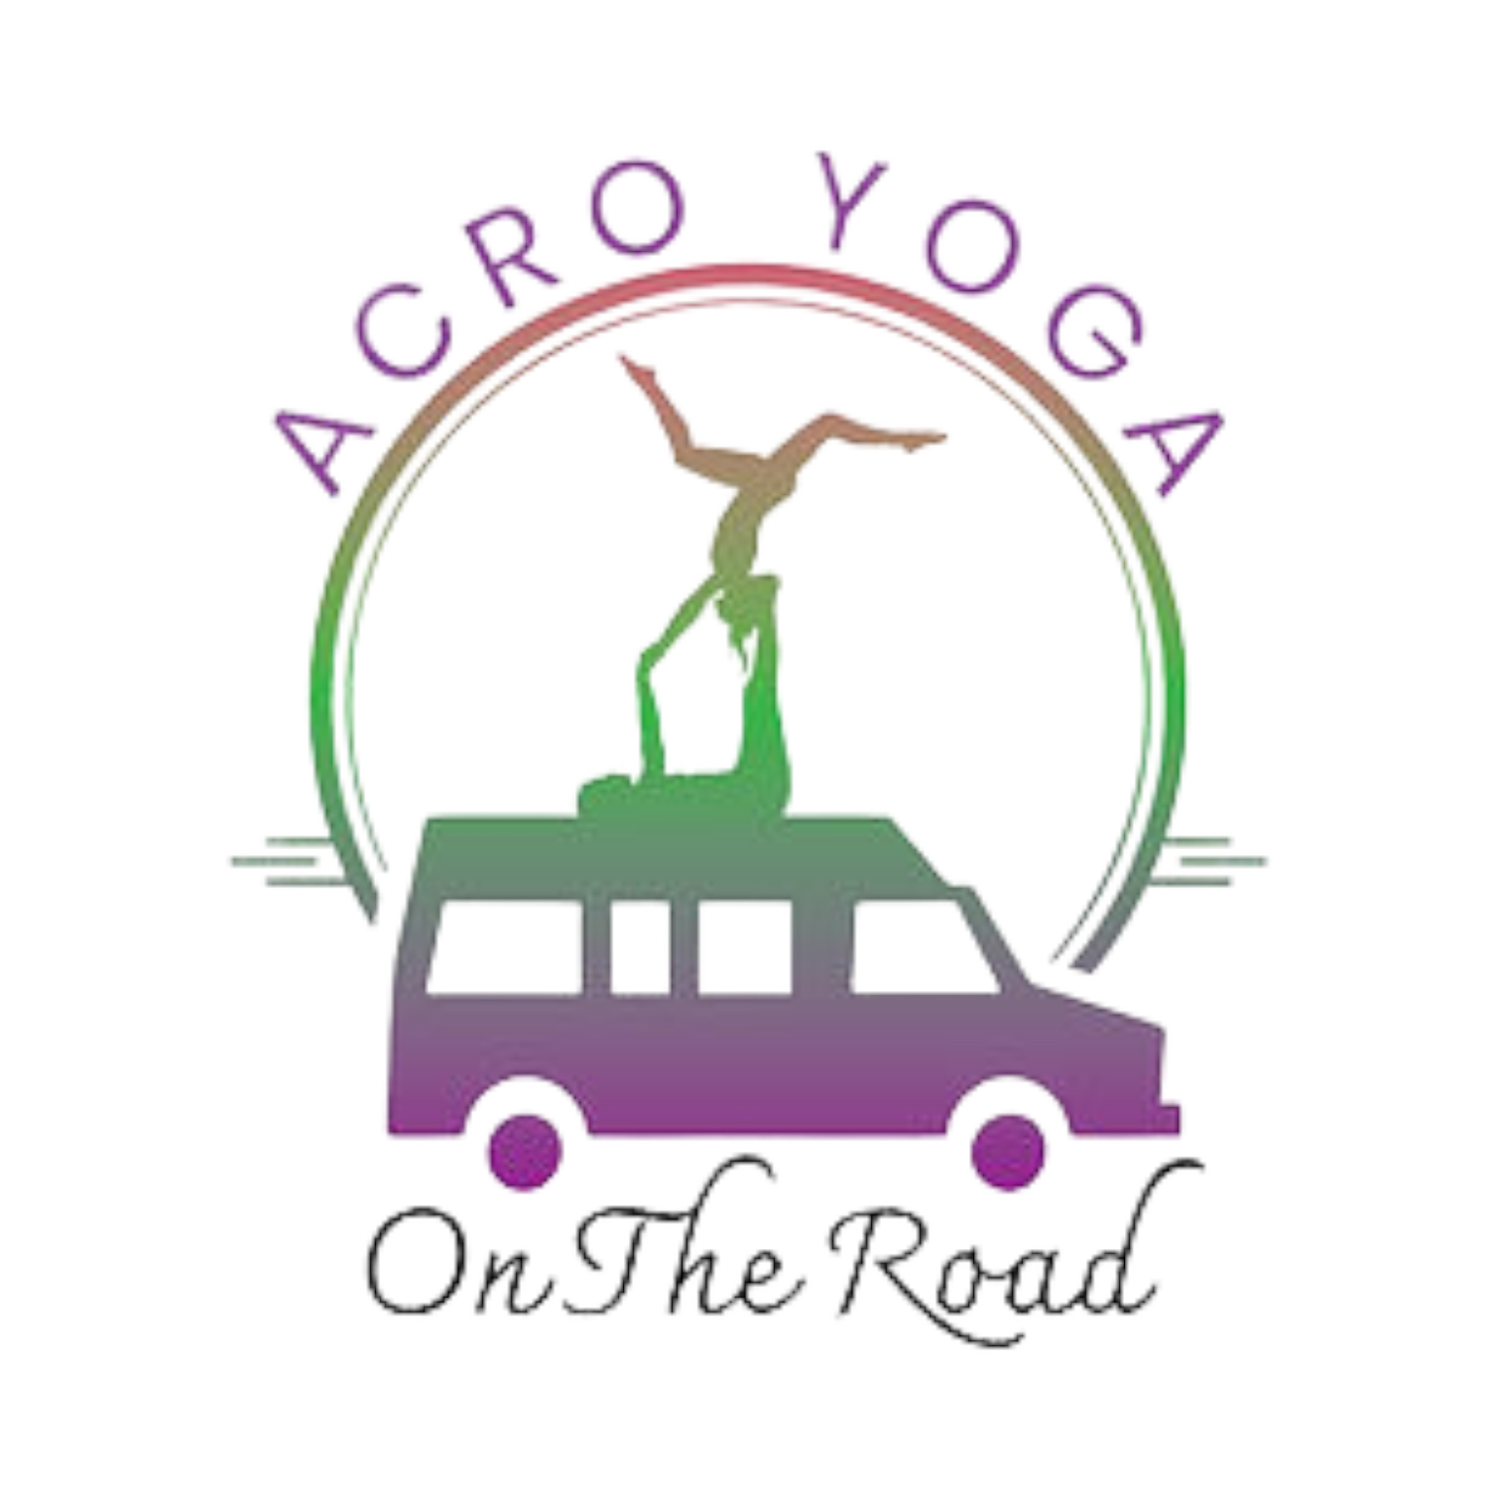 acroyoga on the road clothing and acroyoga workshops